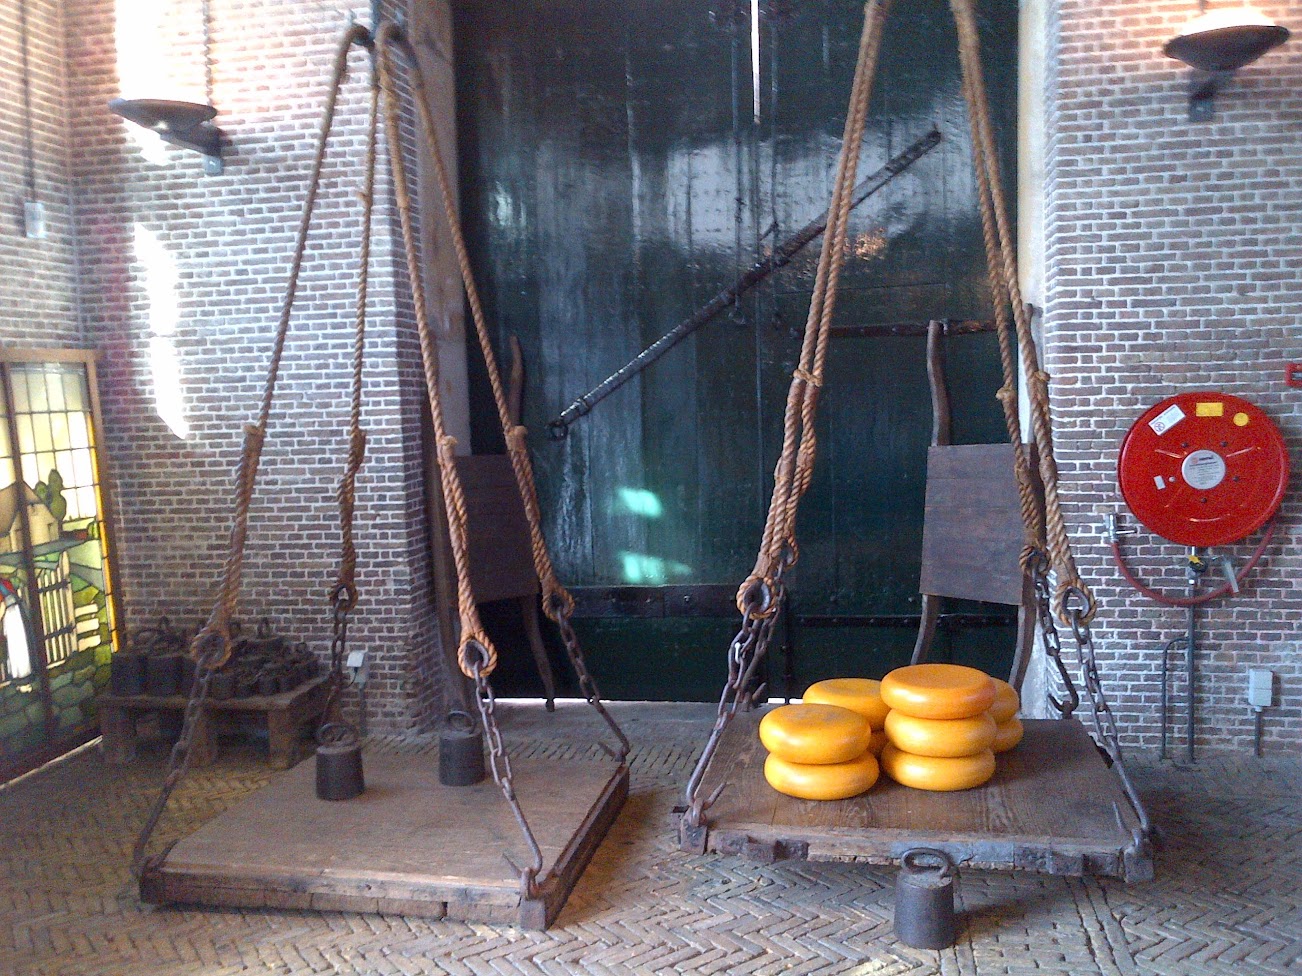 The old weigh scales for Gouda chees in the Waag, or Weigh House in Gouda